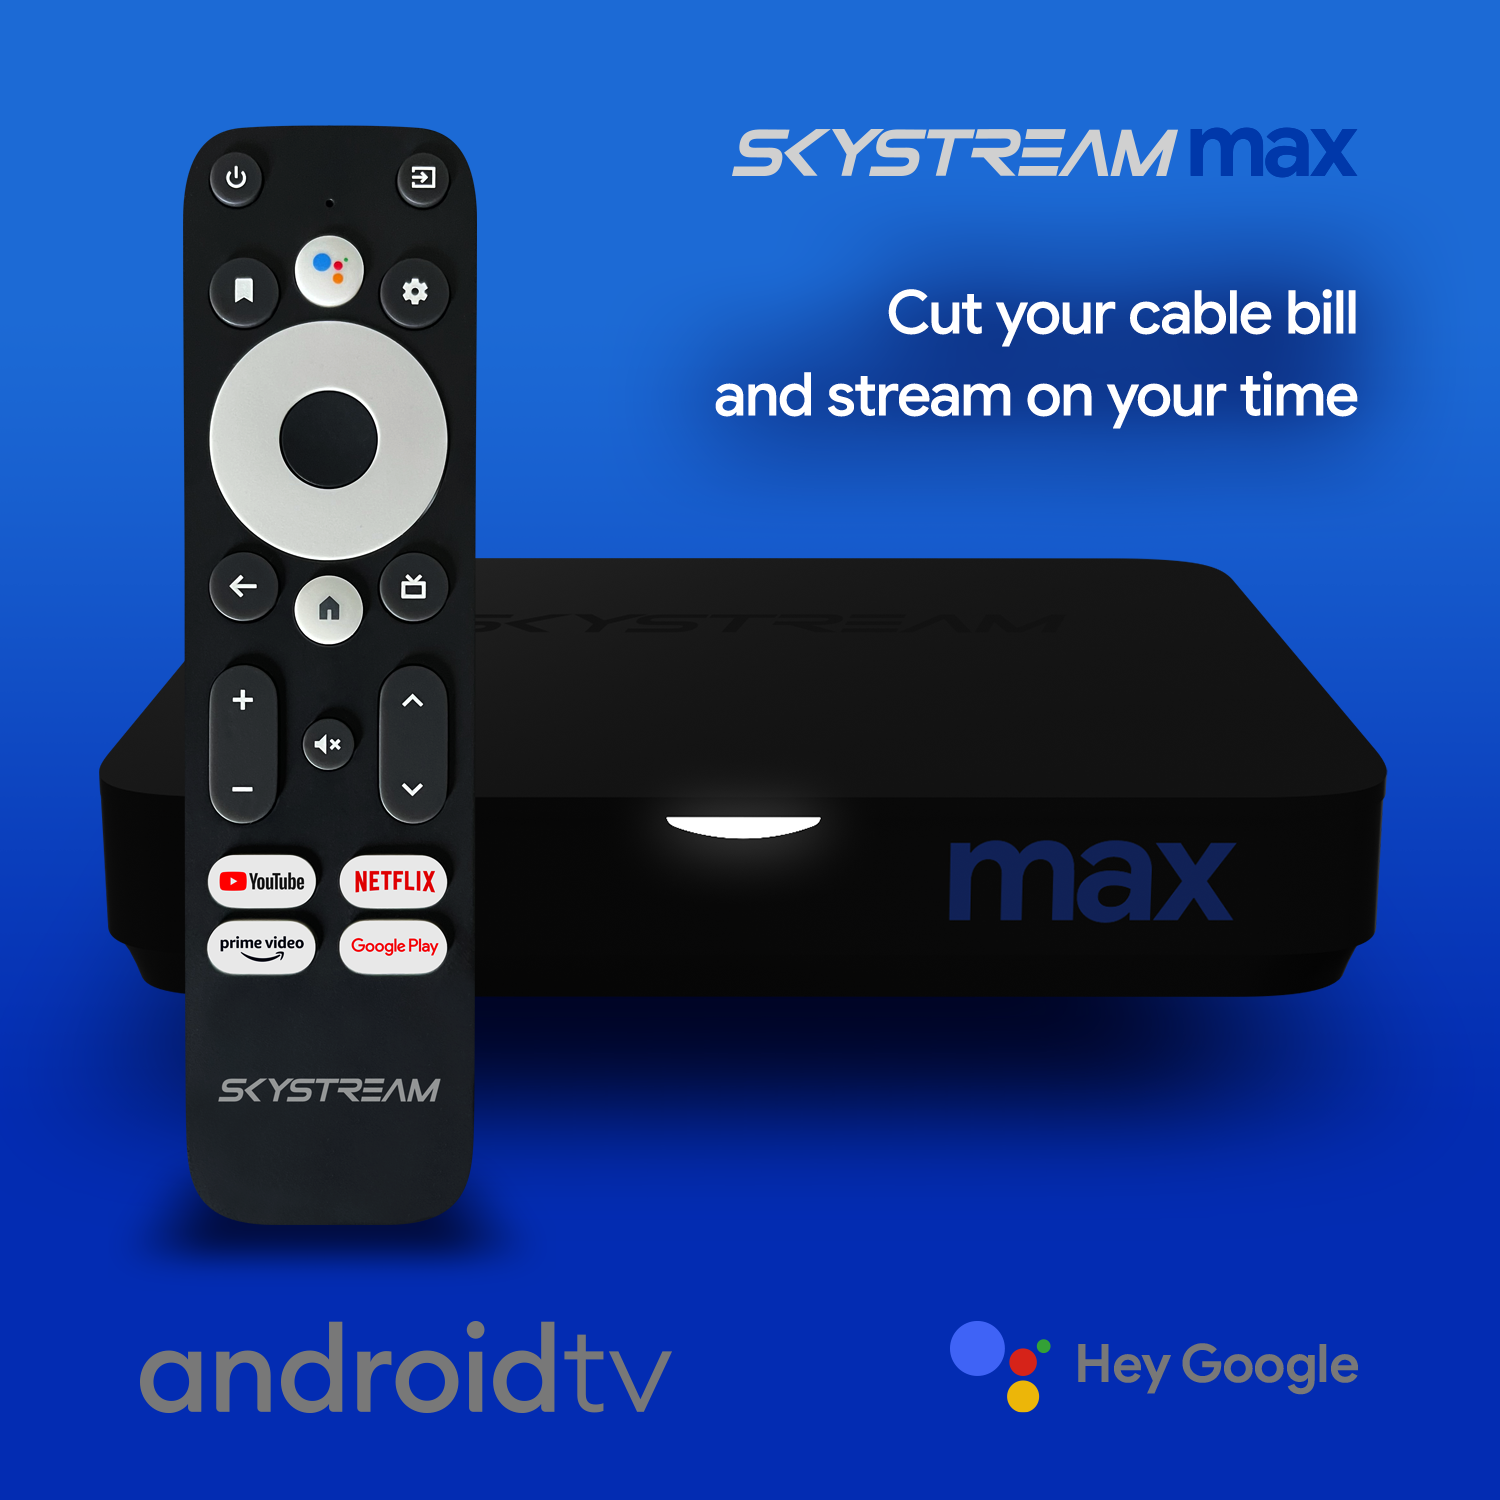 Cut the Cable Cord and Still Enjoy Your Favorites with SkyStream MAX!